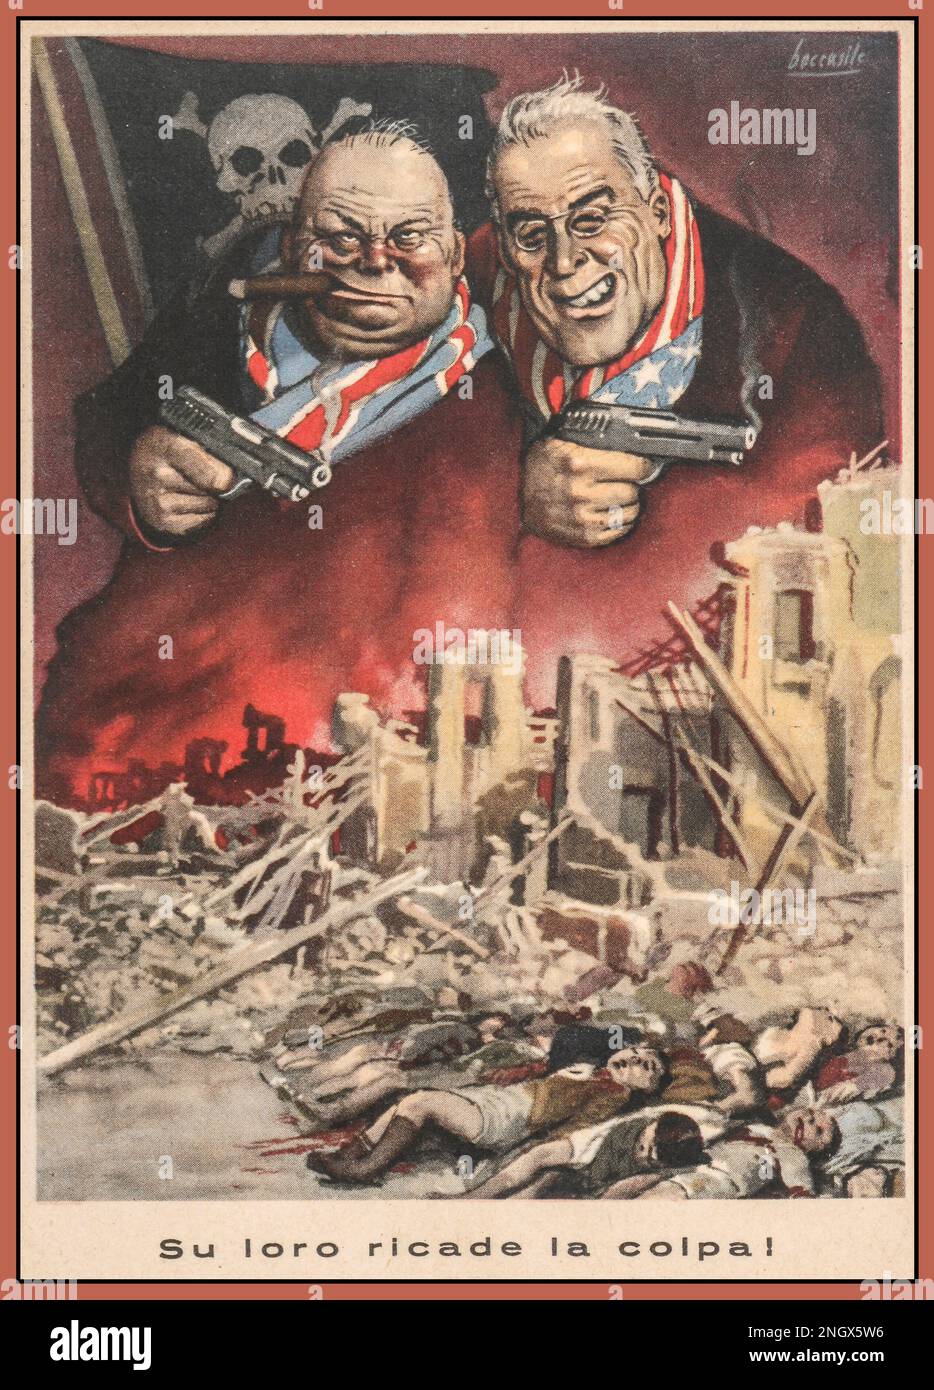 WW2 Anti Allied Propaganda Poster featuring Winston Churchill and Franklin Roosevelt as gangsters. 'Su loro ricade la colpa! '  'On them rests the blame!' World War II Italian anti-American/anti-British/anti-Allied Fascist propaganda poster, by Italian illustrator Gino Boccasile (1901–1952) 1943–1945, showing cartoon caricatures of Winston Churchill and Franklin D. Roosevelt as gangsters holding pistols, with a pirate flag with skull and crossbones, and dead people on the ground in a city of ruins Stock Photo